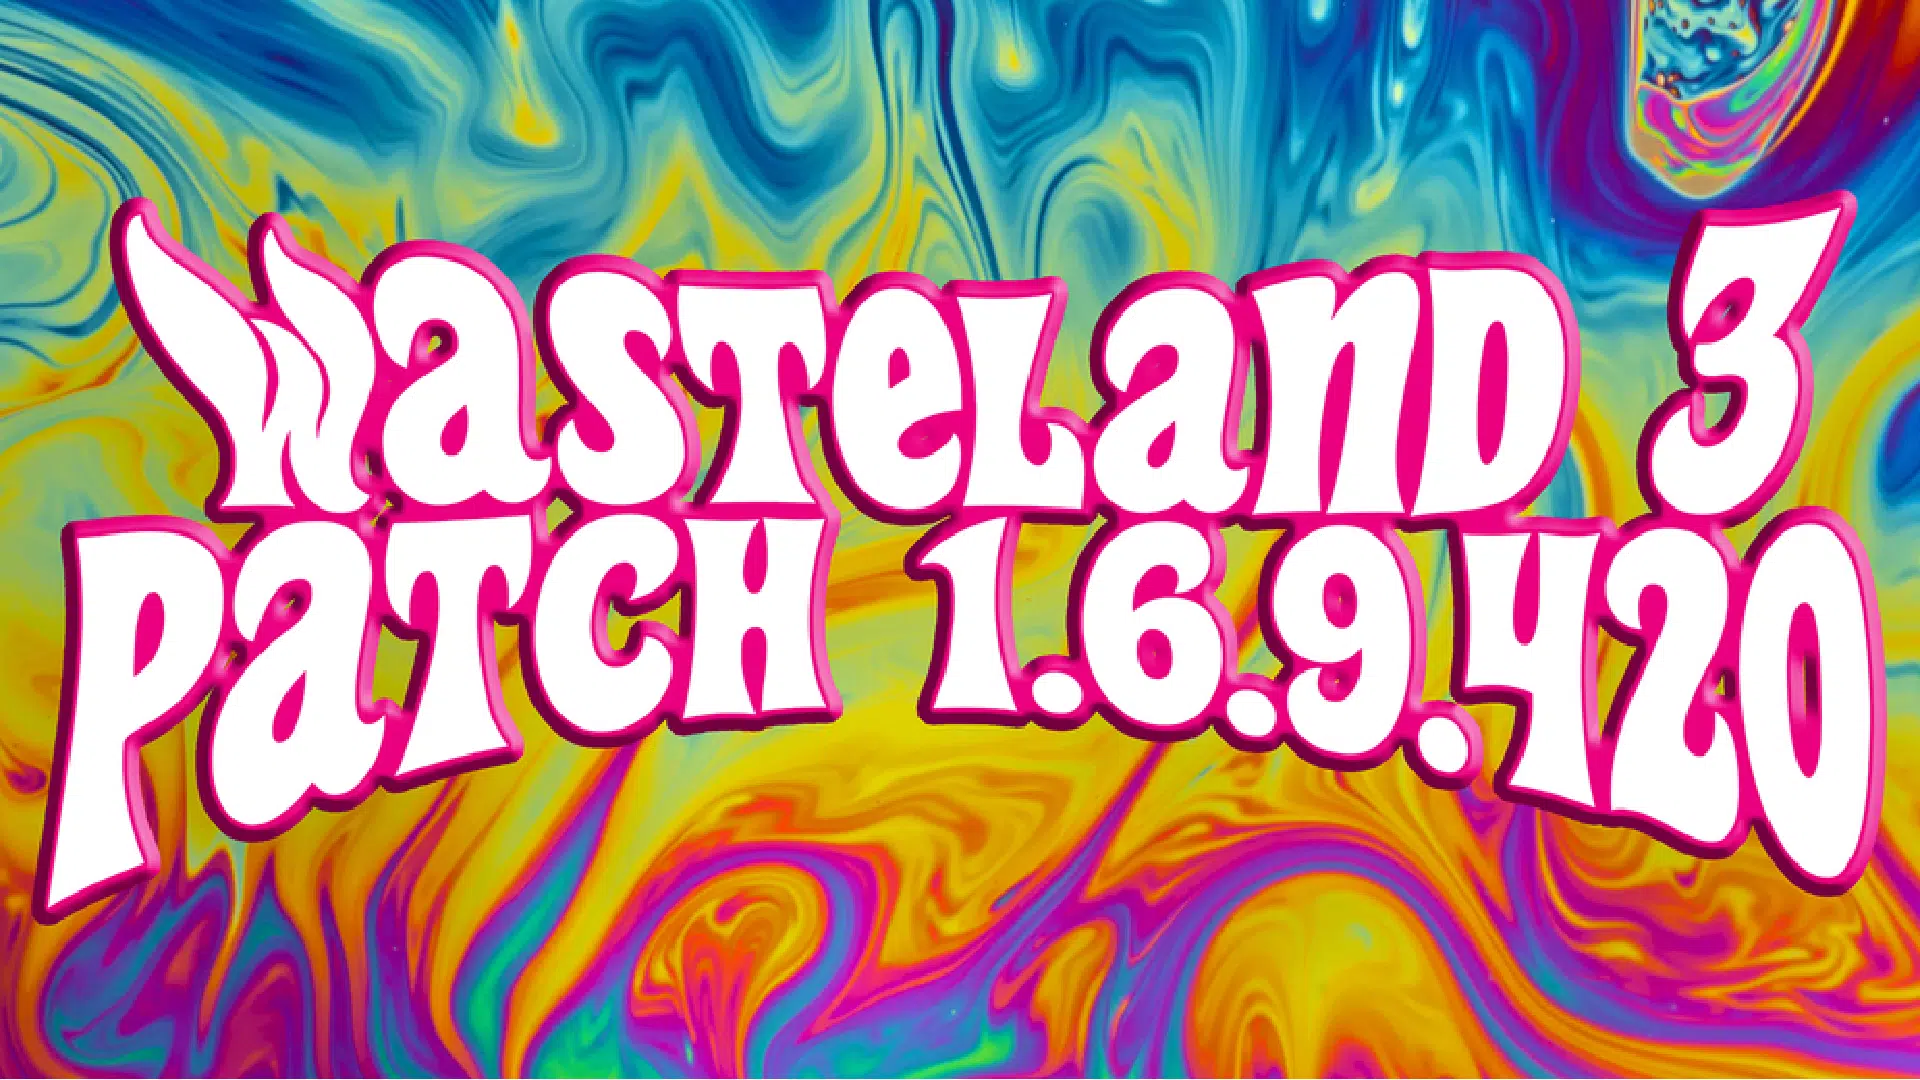 Wasteland 3 Update 1.26 Out This October 27 for Version 1.6.9.420